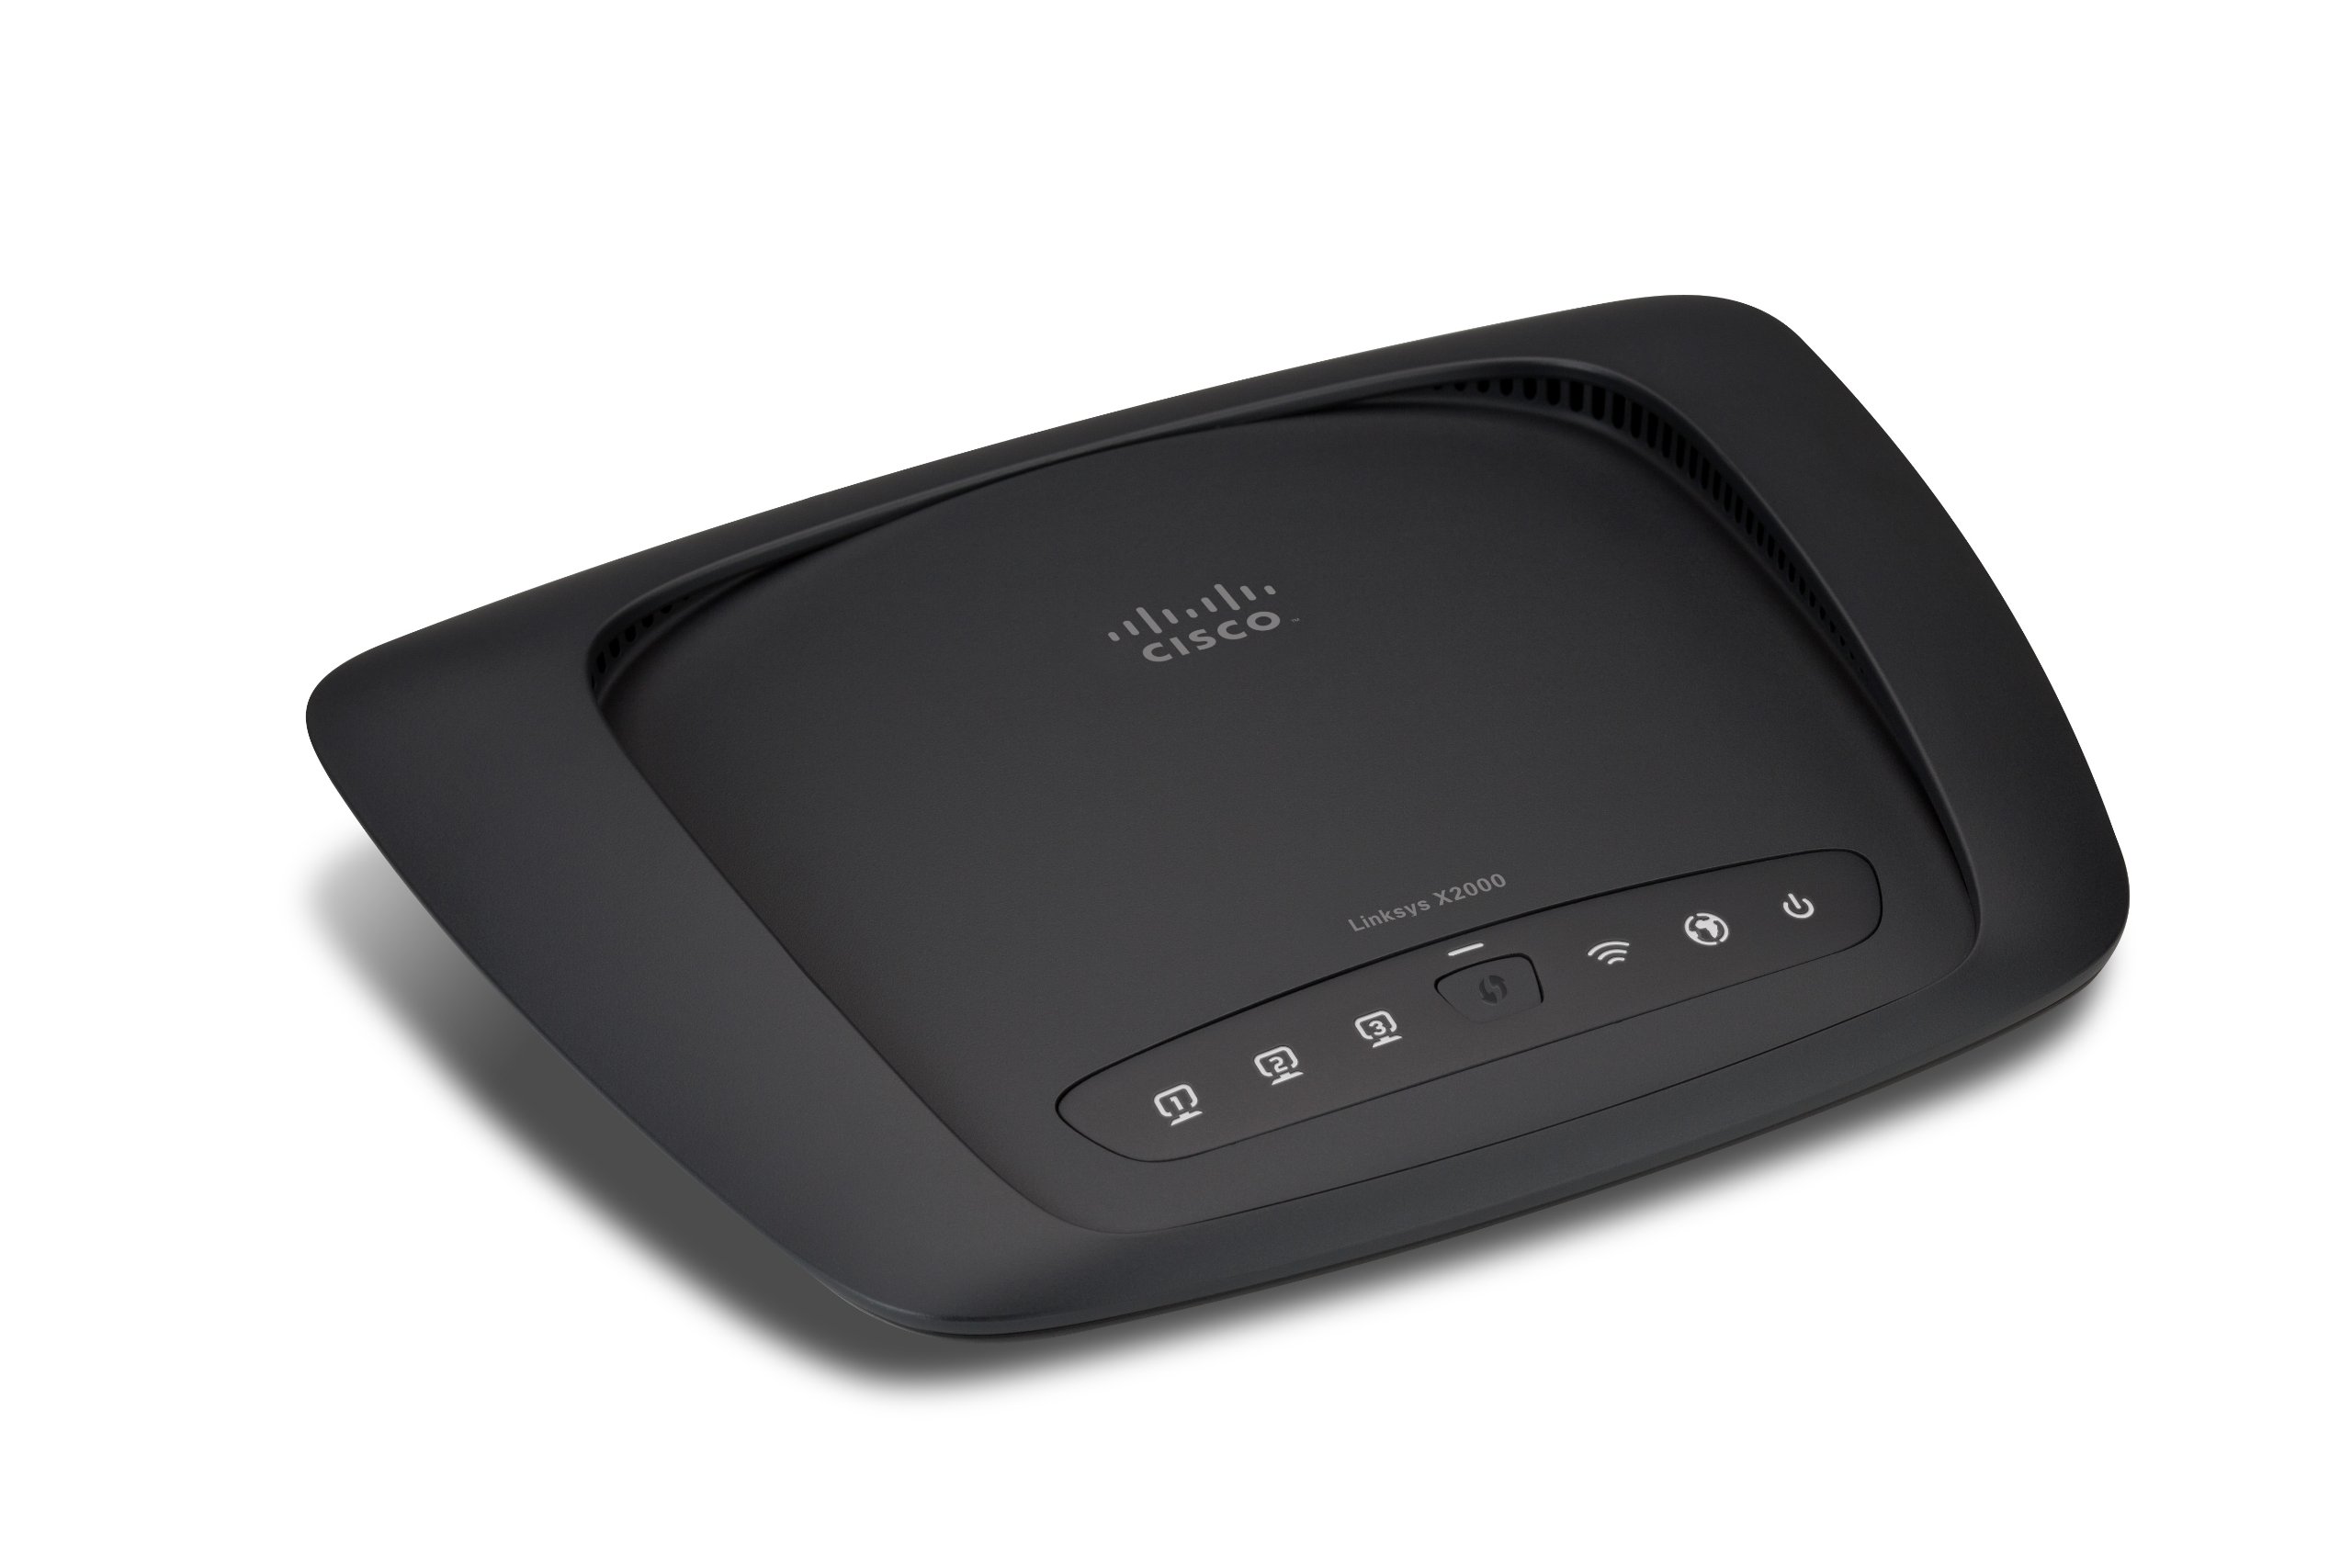 Linksys X2000 Wireless-N Router with ADSL2+ Modem